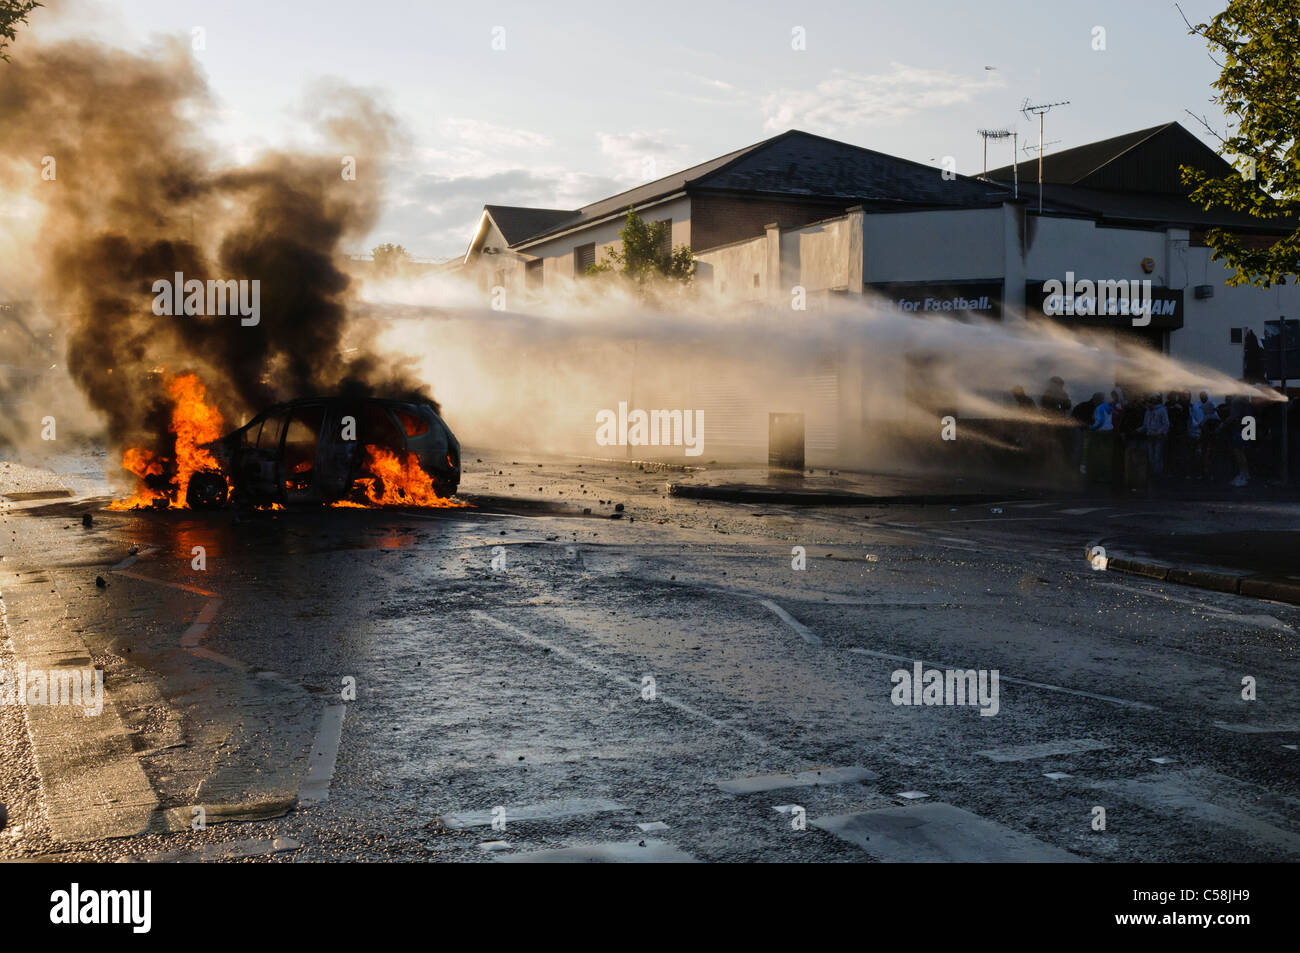 Rioters set fire to a stolen car while water cannon disperse rioters Stock Photo